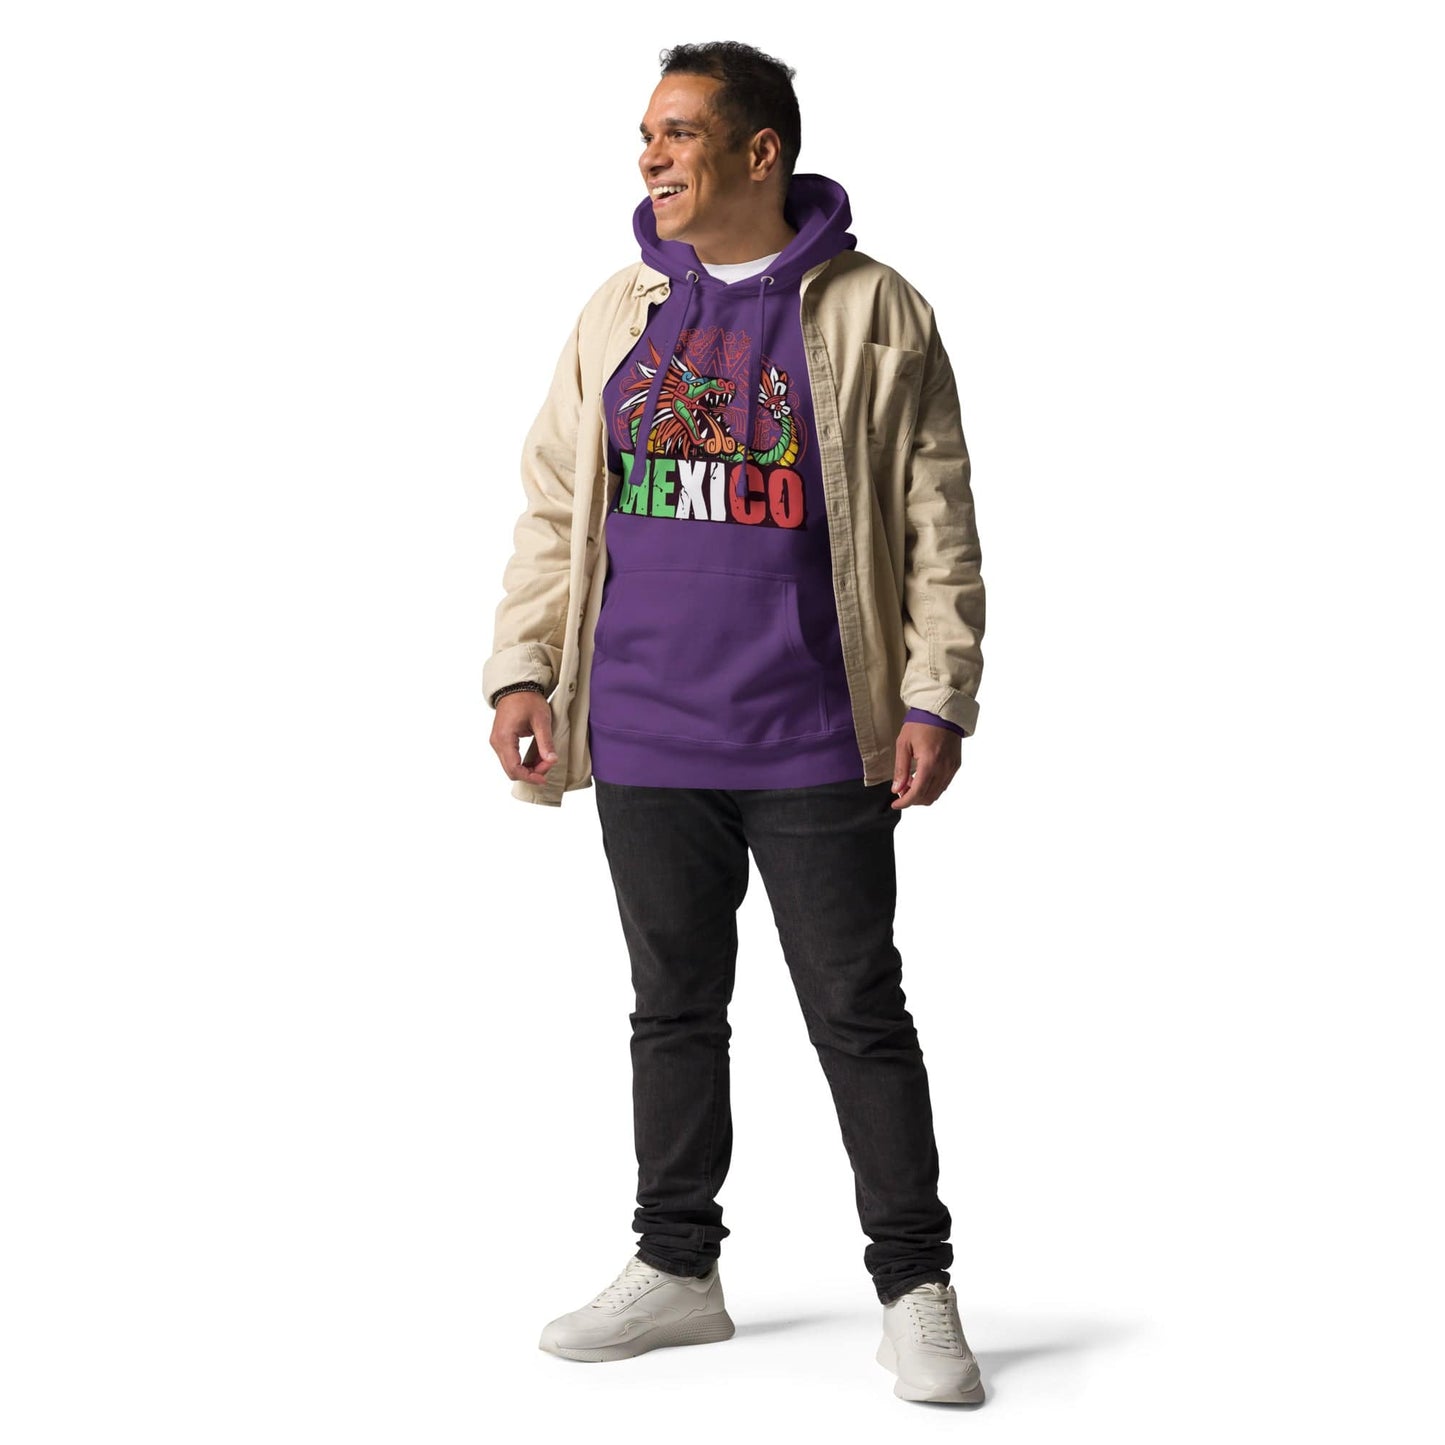 Mexico Hoodie